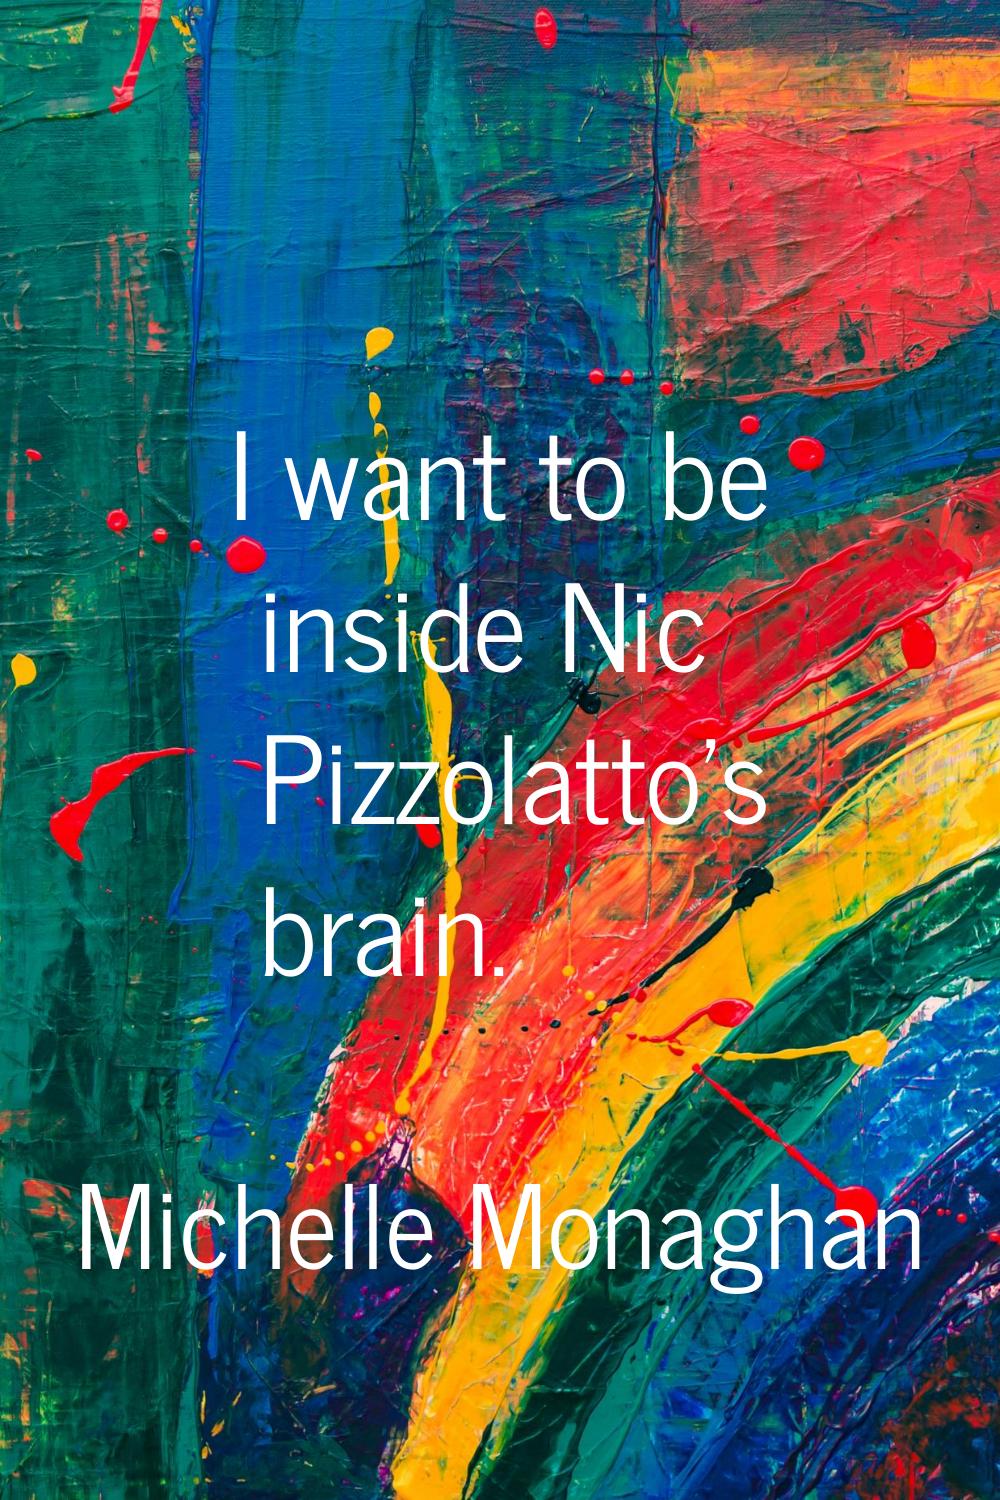 I want to be inside Nic Pizzolatto's brain.